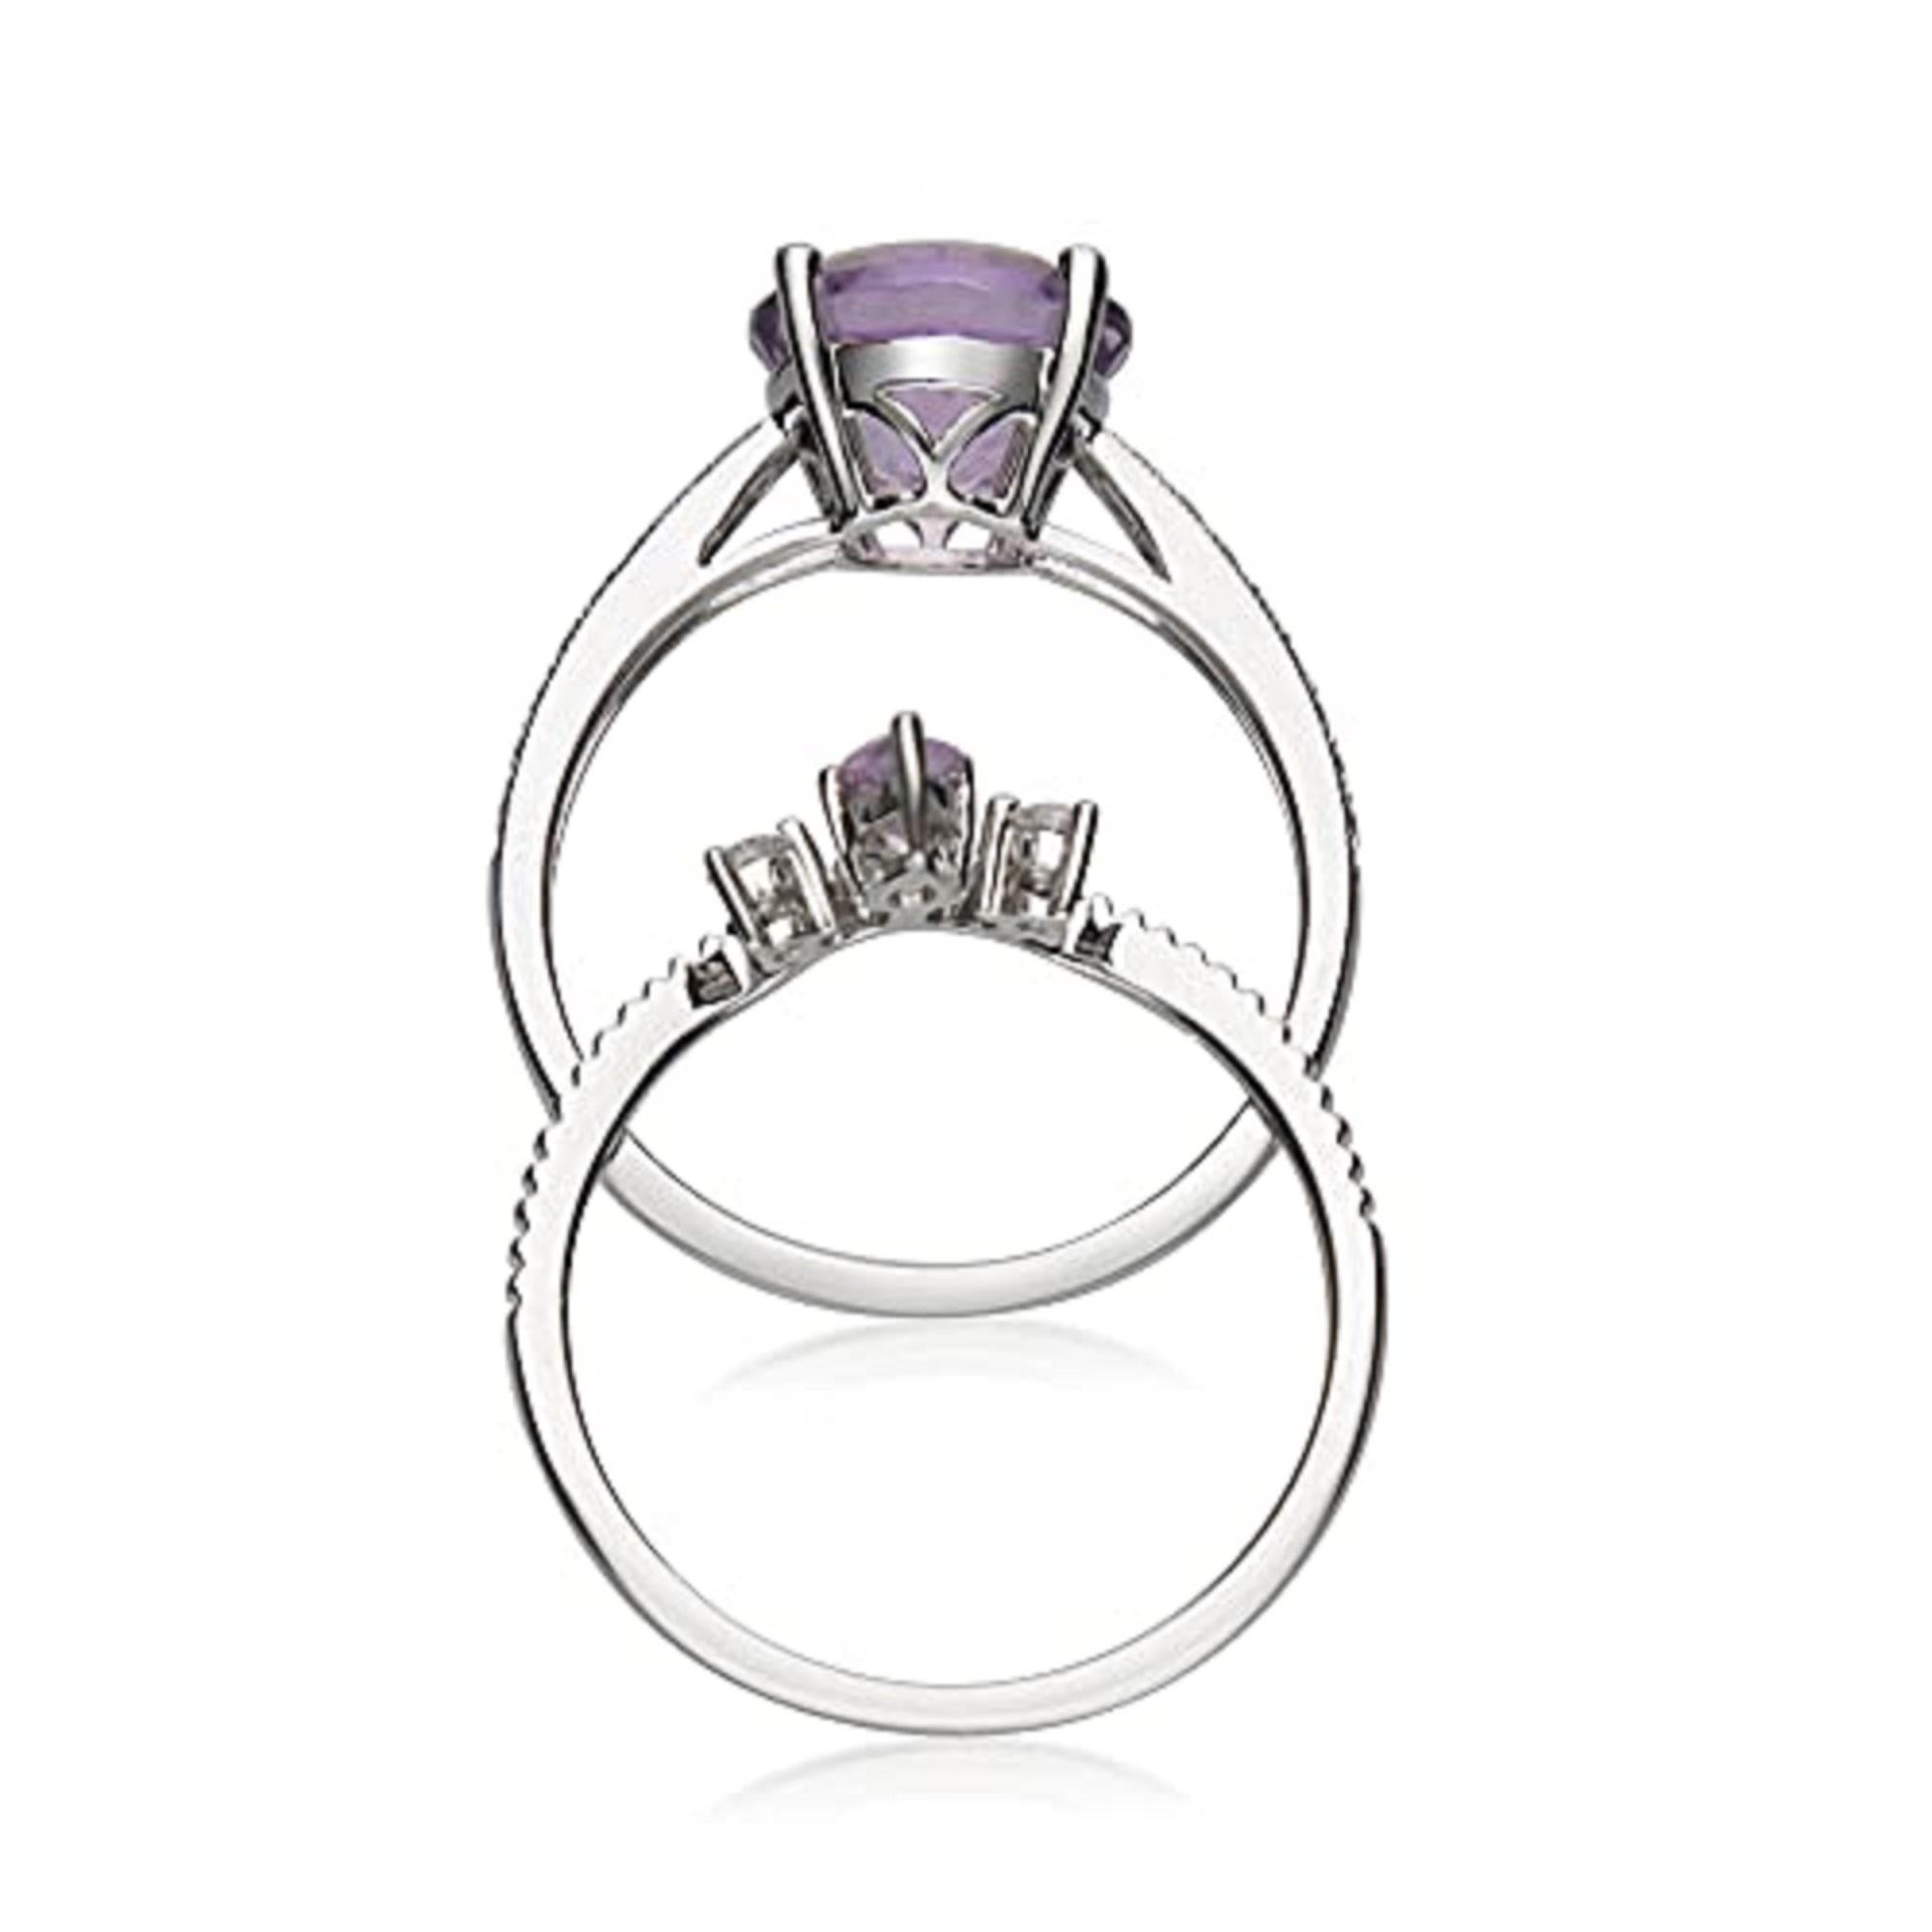 Gin & Grace 14K White Gold Diamond Ring (I1) with Pink Amethyst For Women In New Condition For Sale In New York, NY